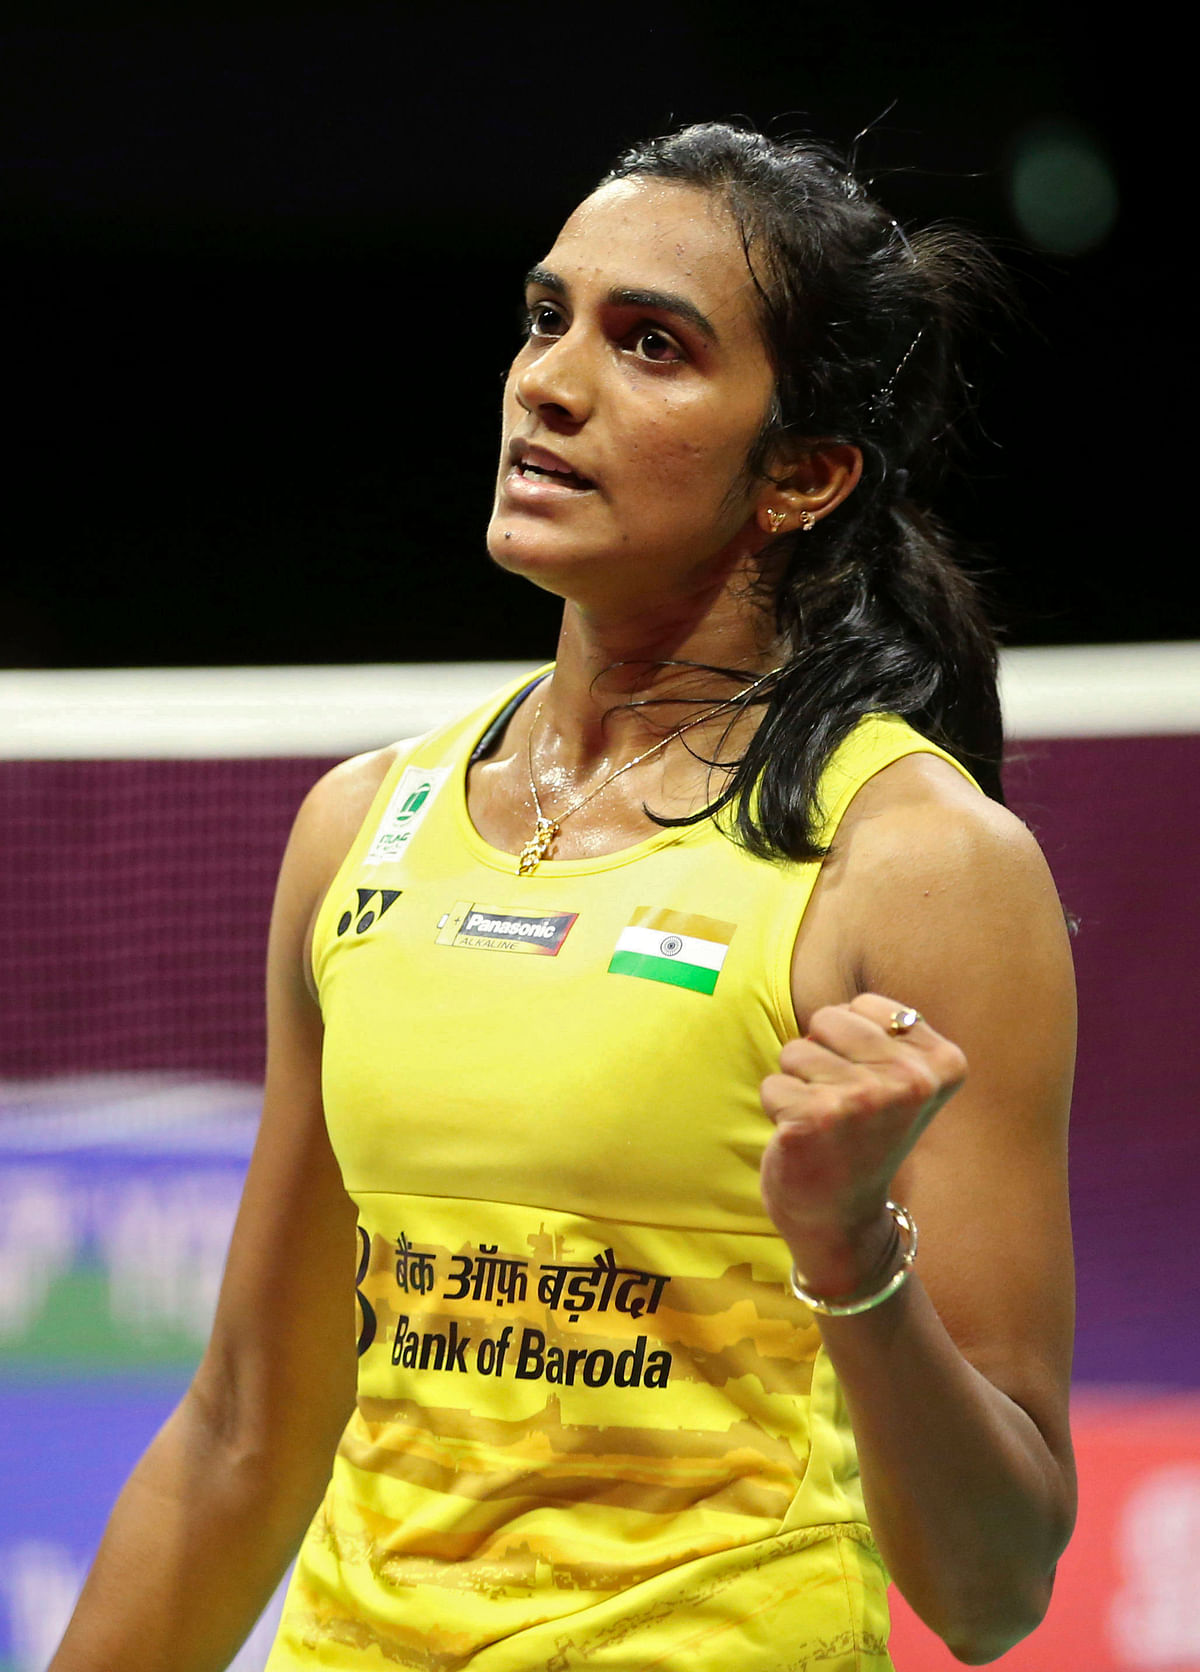 Here’s a look at some of PV Sindhu’s big wins.